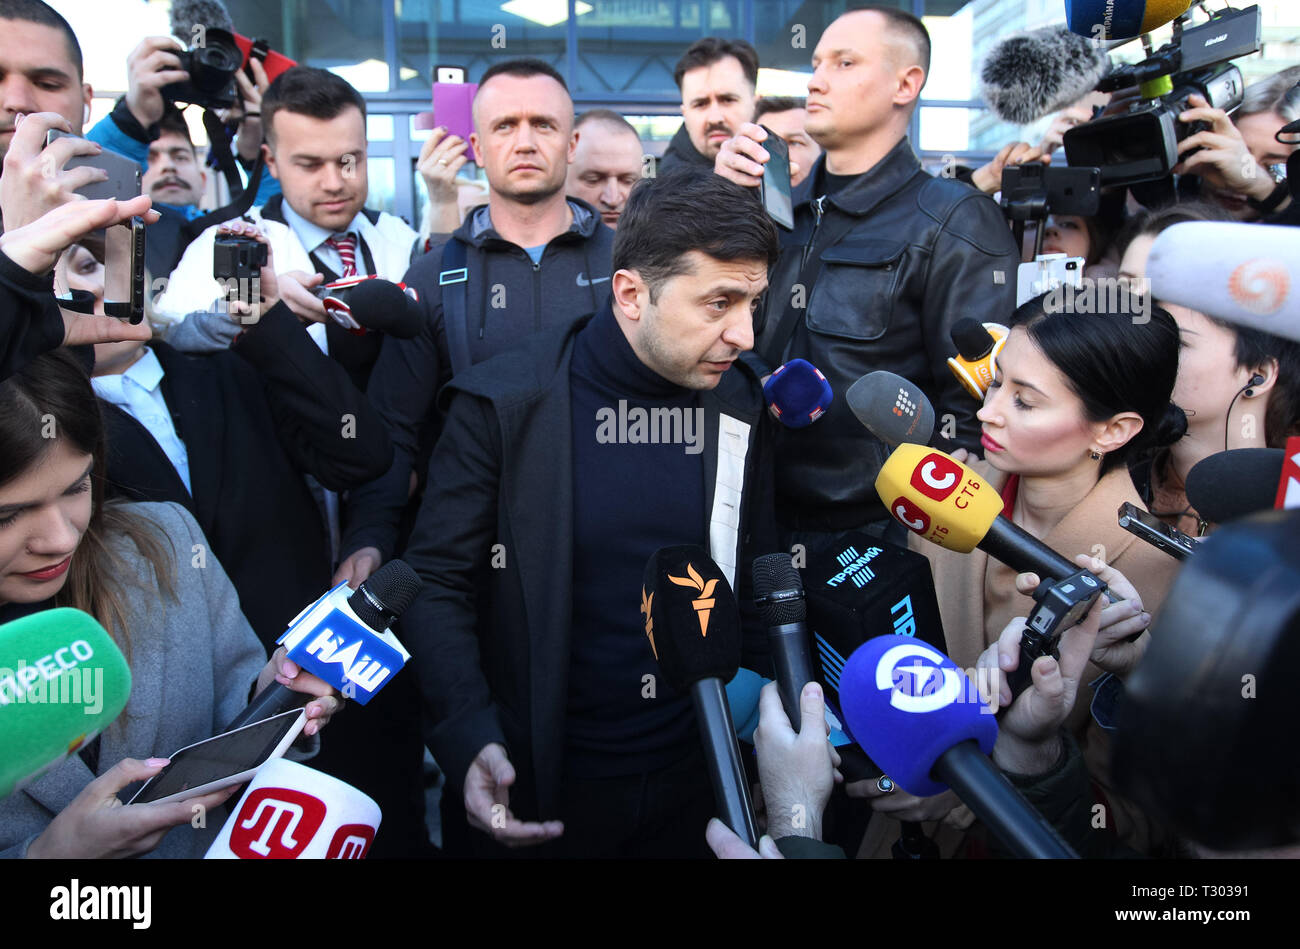 Ukrainian presidential candidate Volodymyr Zelensky seen talking to the media during his visit to the medical center for a test. On April 3, 2019 presidential candidate Volodymyr Zelenskiy declared his readiness to go to the debate before the second round of presidential elections with Ukrainian President and presidential candidate Petro Poroshenko, however, he voiced a number of conditions, in particular, the debate should be held at the Olympiyskiy stadium in Kiev, and candidates must pass a test for alcohol and drugs. Ukrainian President Petro Poroshenko agreed to these terms. Stock Photo